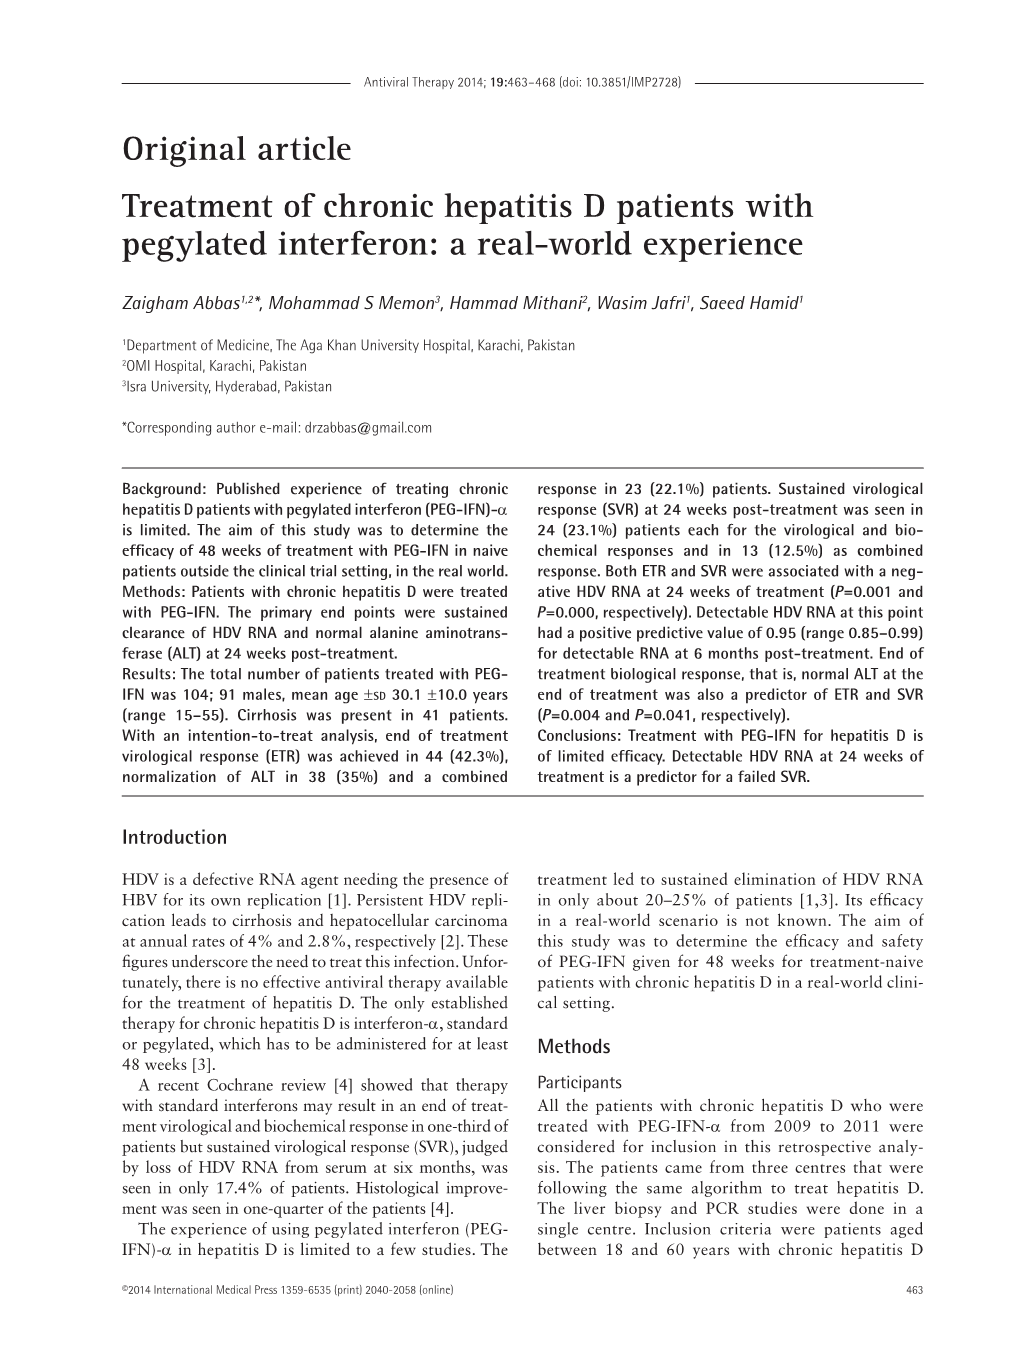 Original Article Treatment of Chronic Hepatitis D Patients with Pegylated Interferon: a Real-World Experience